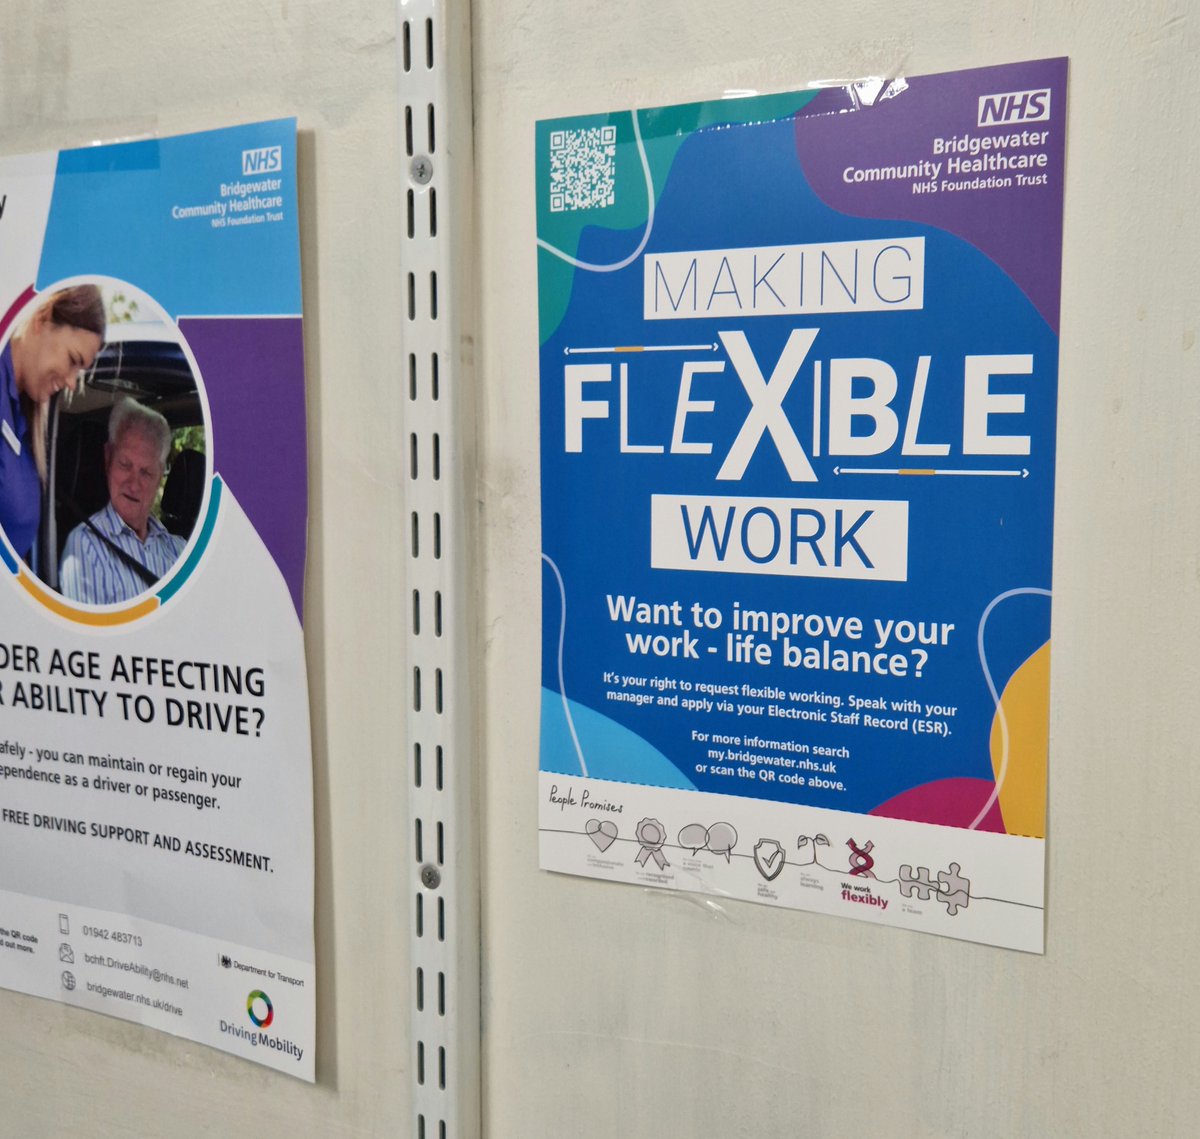 Out with staff @wearebchft today in Runcorn and spotted our flexible working promotion posters, these are up throughout the Trust. Well done team Runcorn! if staff want any more info please visit the hub or speak to your line manager @WeAreBCHFT #flexibleworking #TeamBridgewater